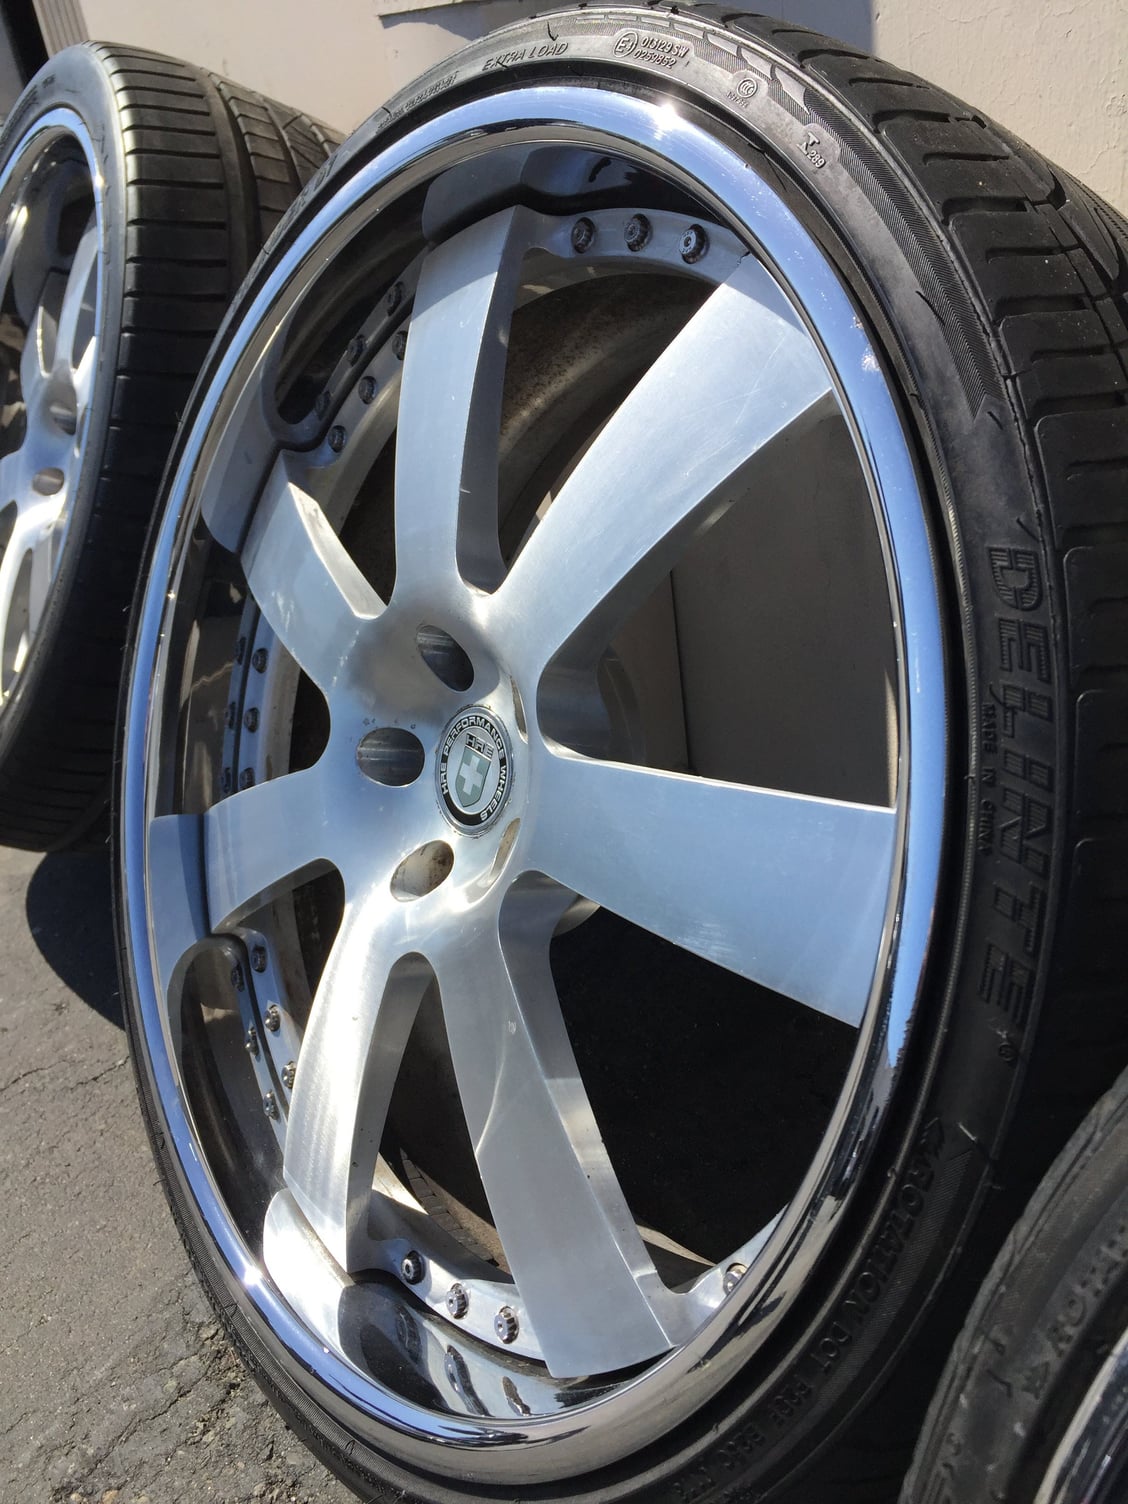 Wheels and Tires/Axles - 22" HRE #948R 3-Pc Wheels and Tires - Polished Lip with Brushed Center - S550 W221 - Used - 2007 to 2013 Mercedes-Benz S550 - Huntington Beach, CA 92649, United States